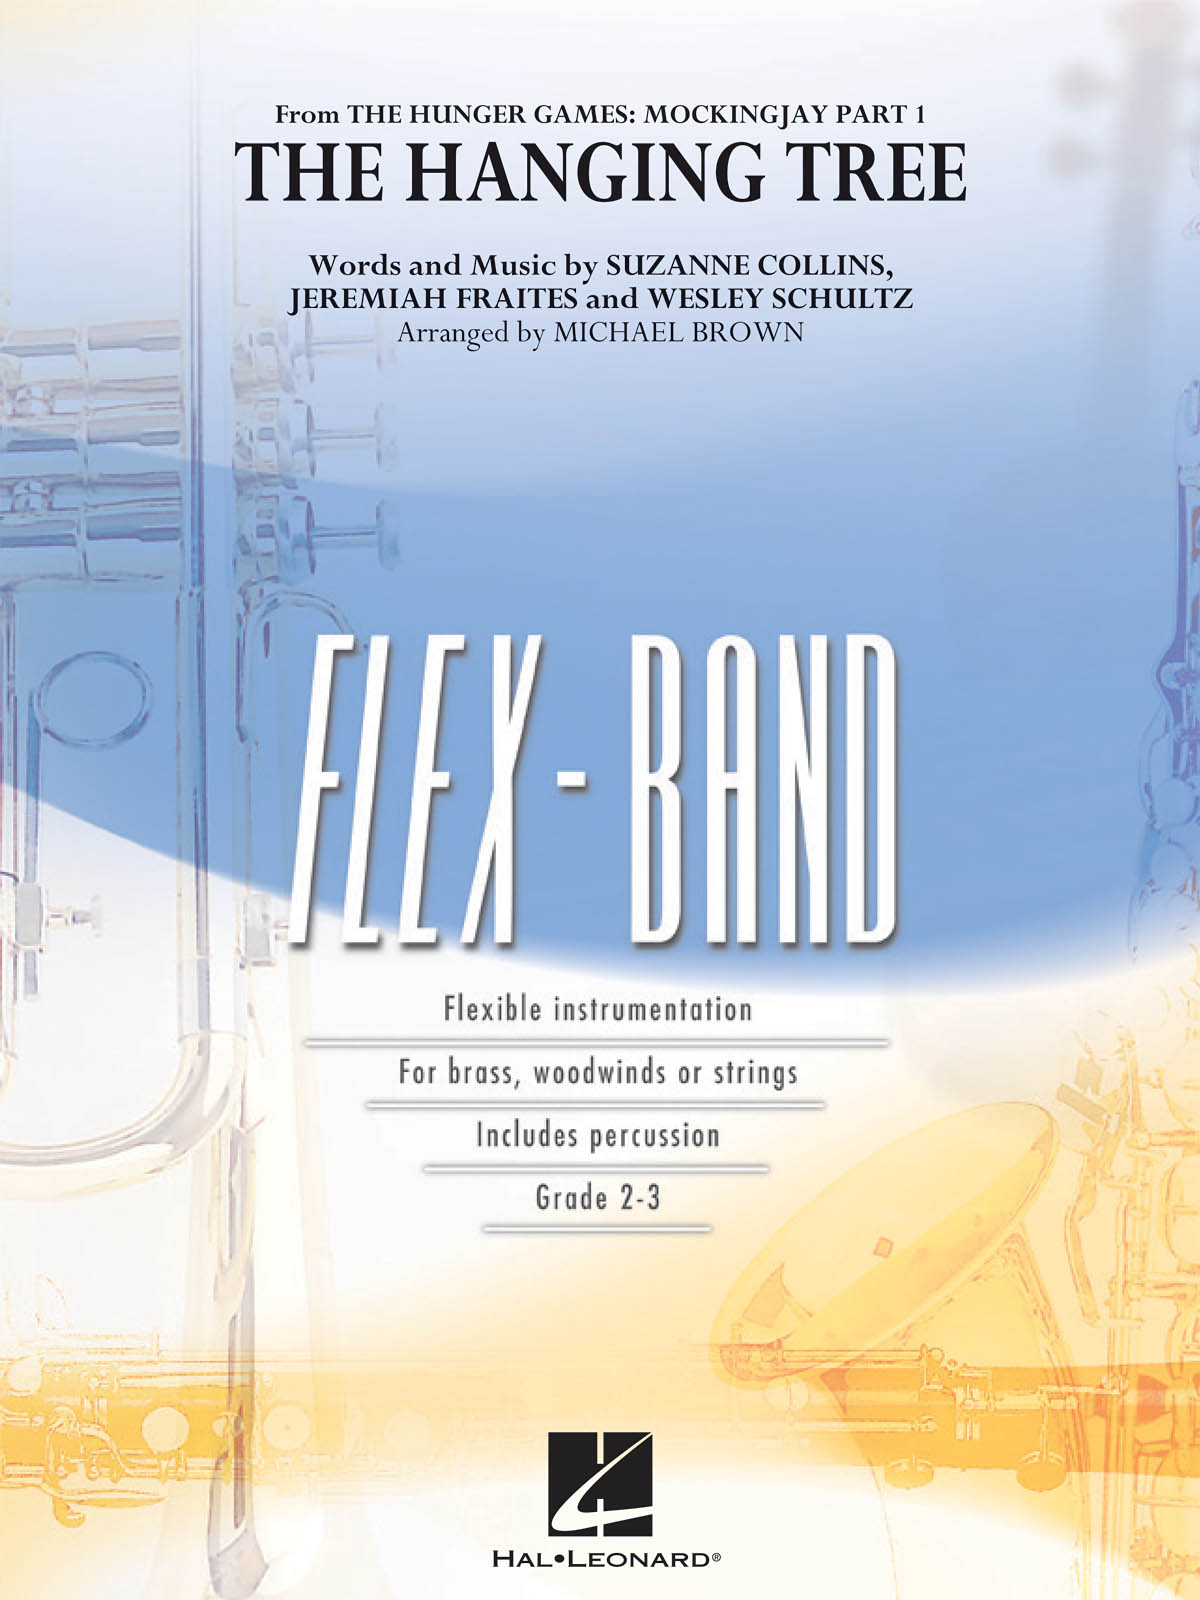 Jeremiah Fraites Suzanne Collins Wesley Schultz: The Hanging Tree: Concert Band: